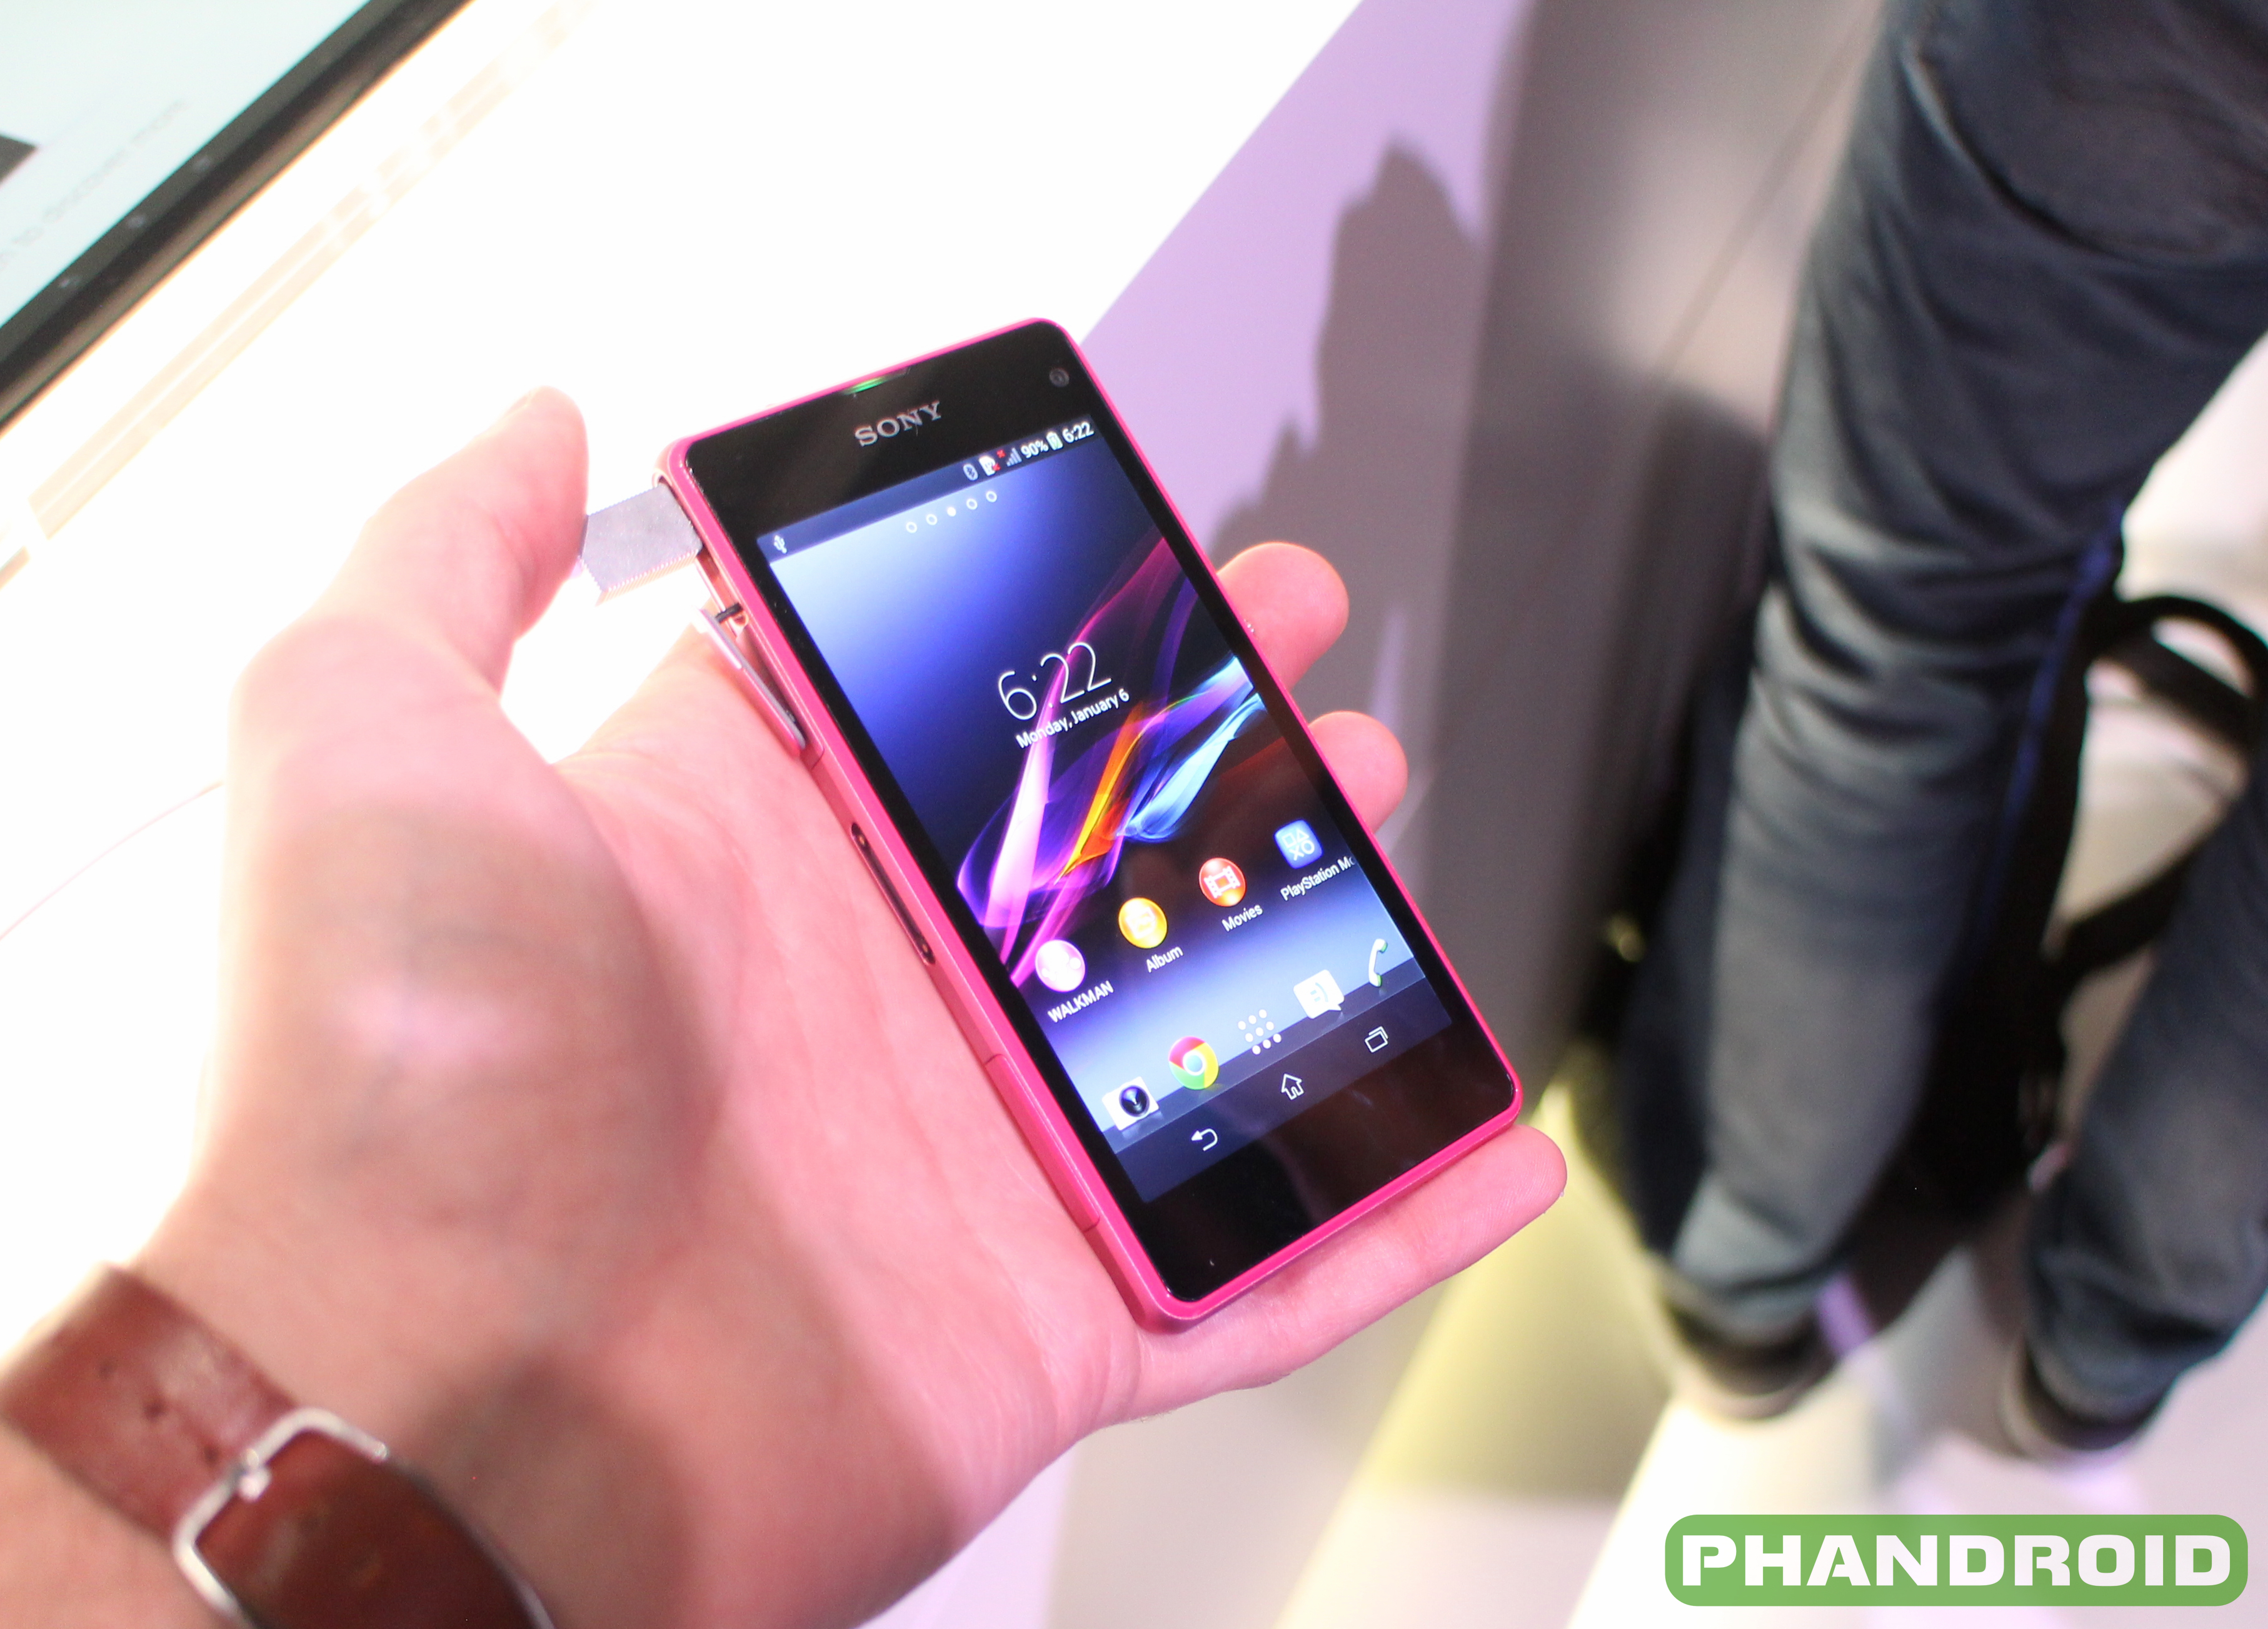 Sony Xperia Z1 Compact now from Sony, supports AT&T/T- Mobile 4G LTE – Phandroid